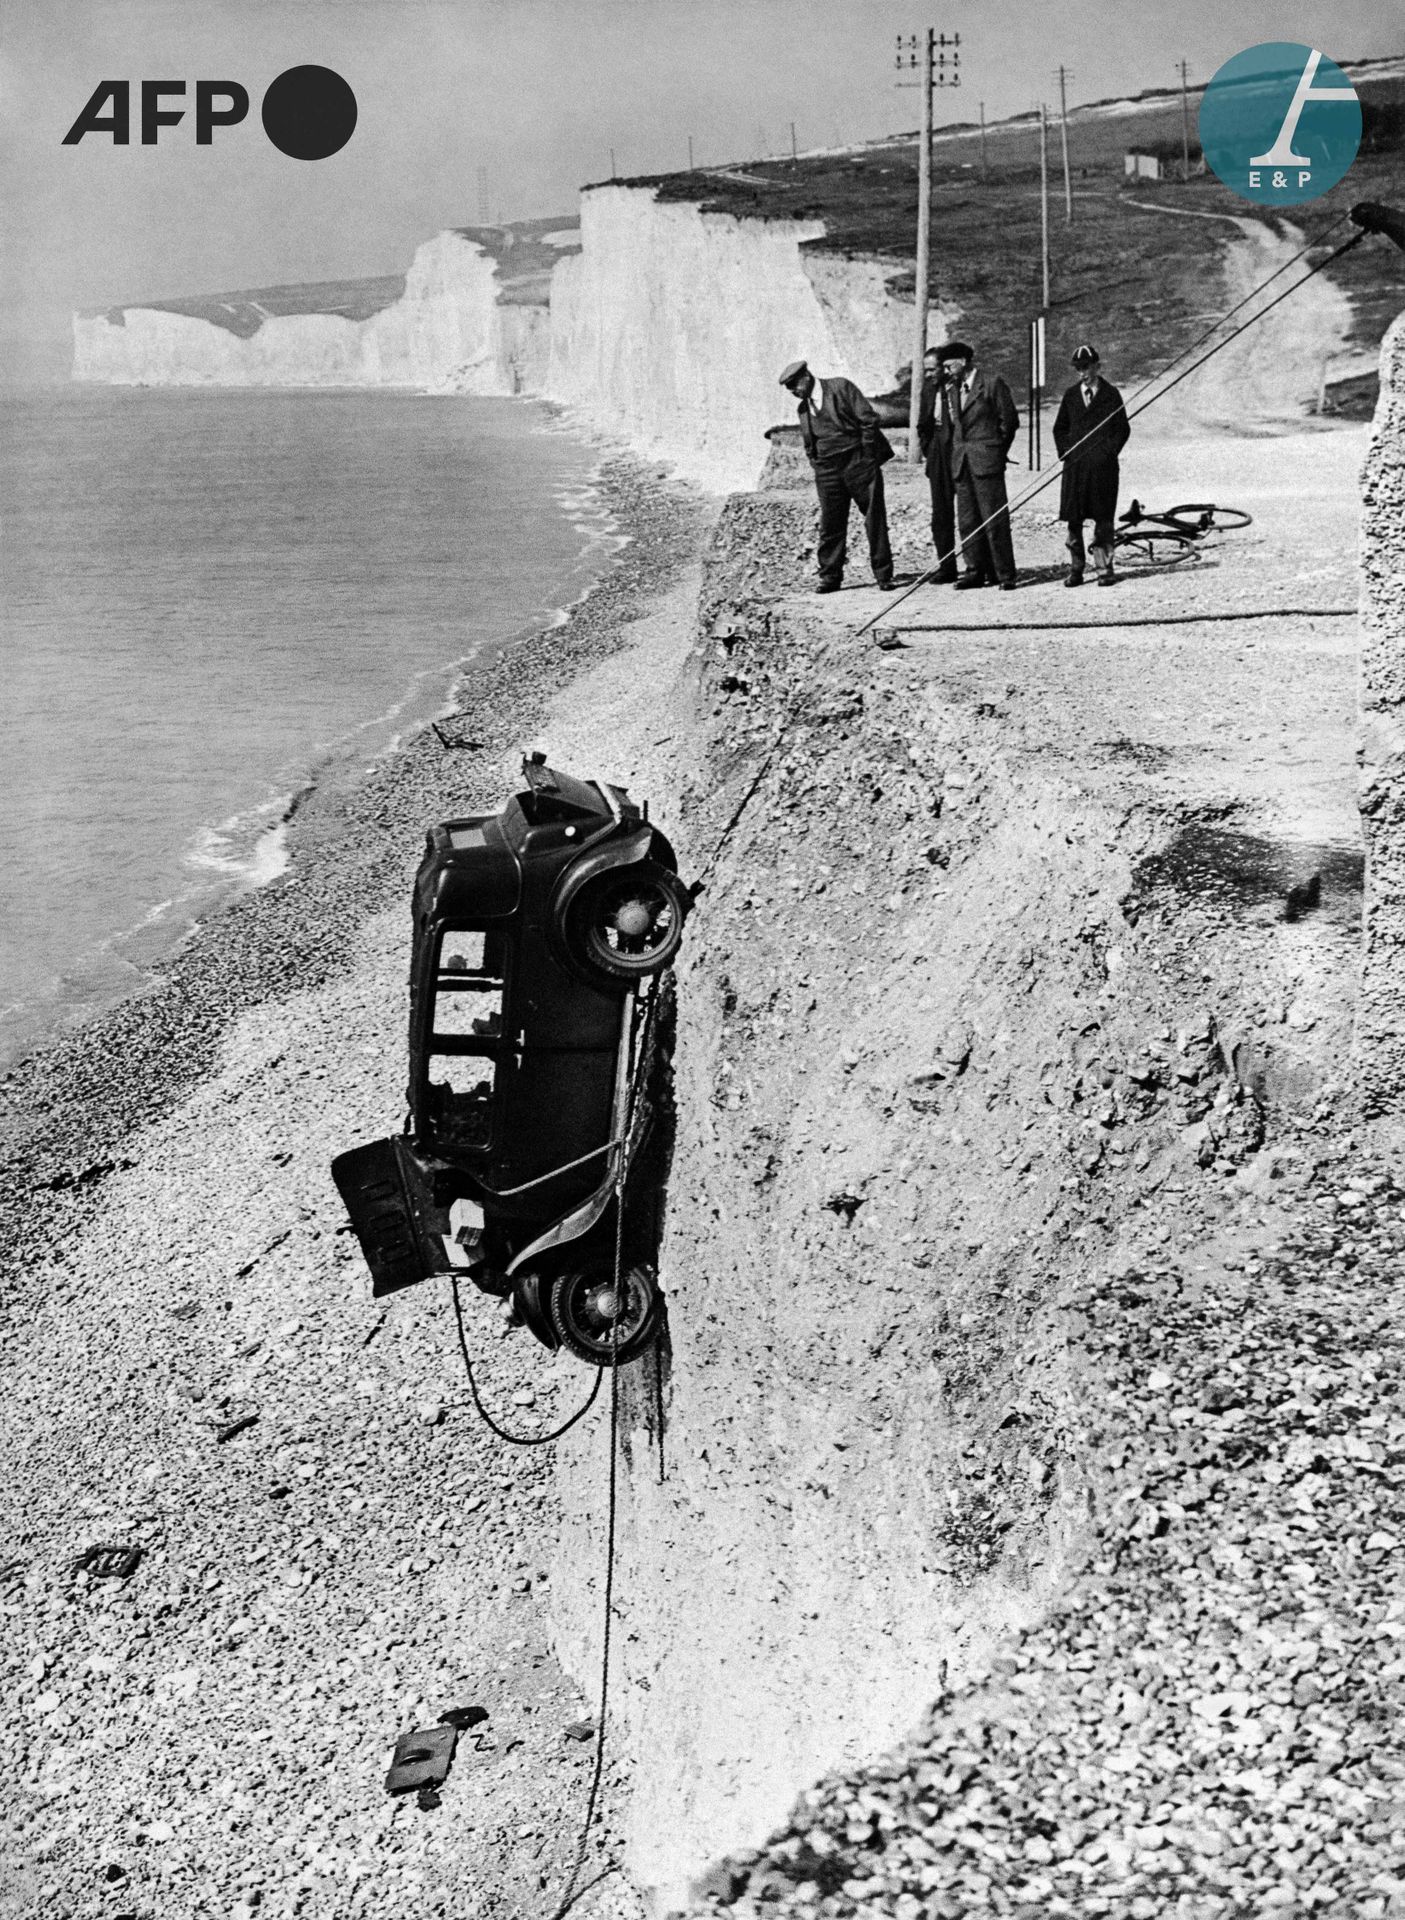 Null AFP

Men watching a vehicle fall from a cliff on the Normandy coast, 1930s.&hellip;